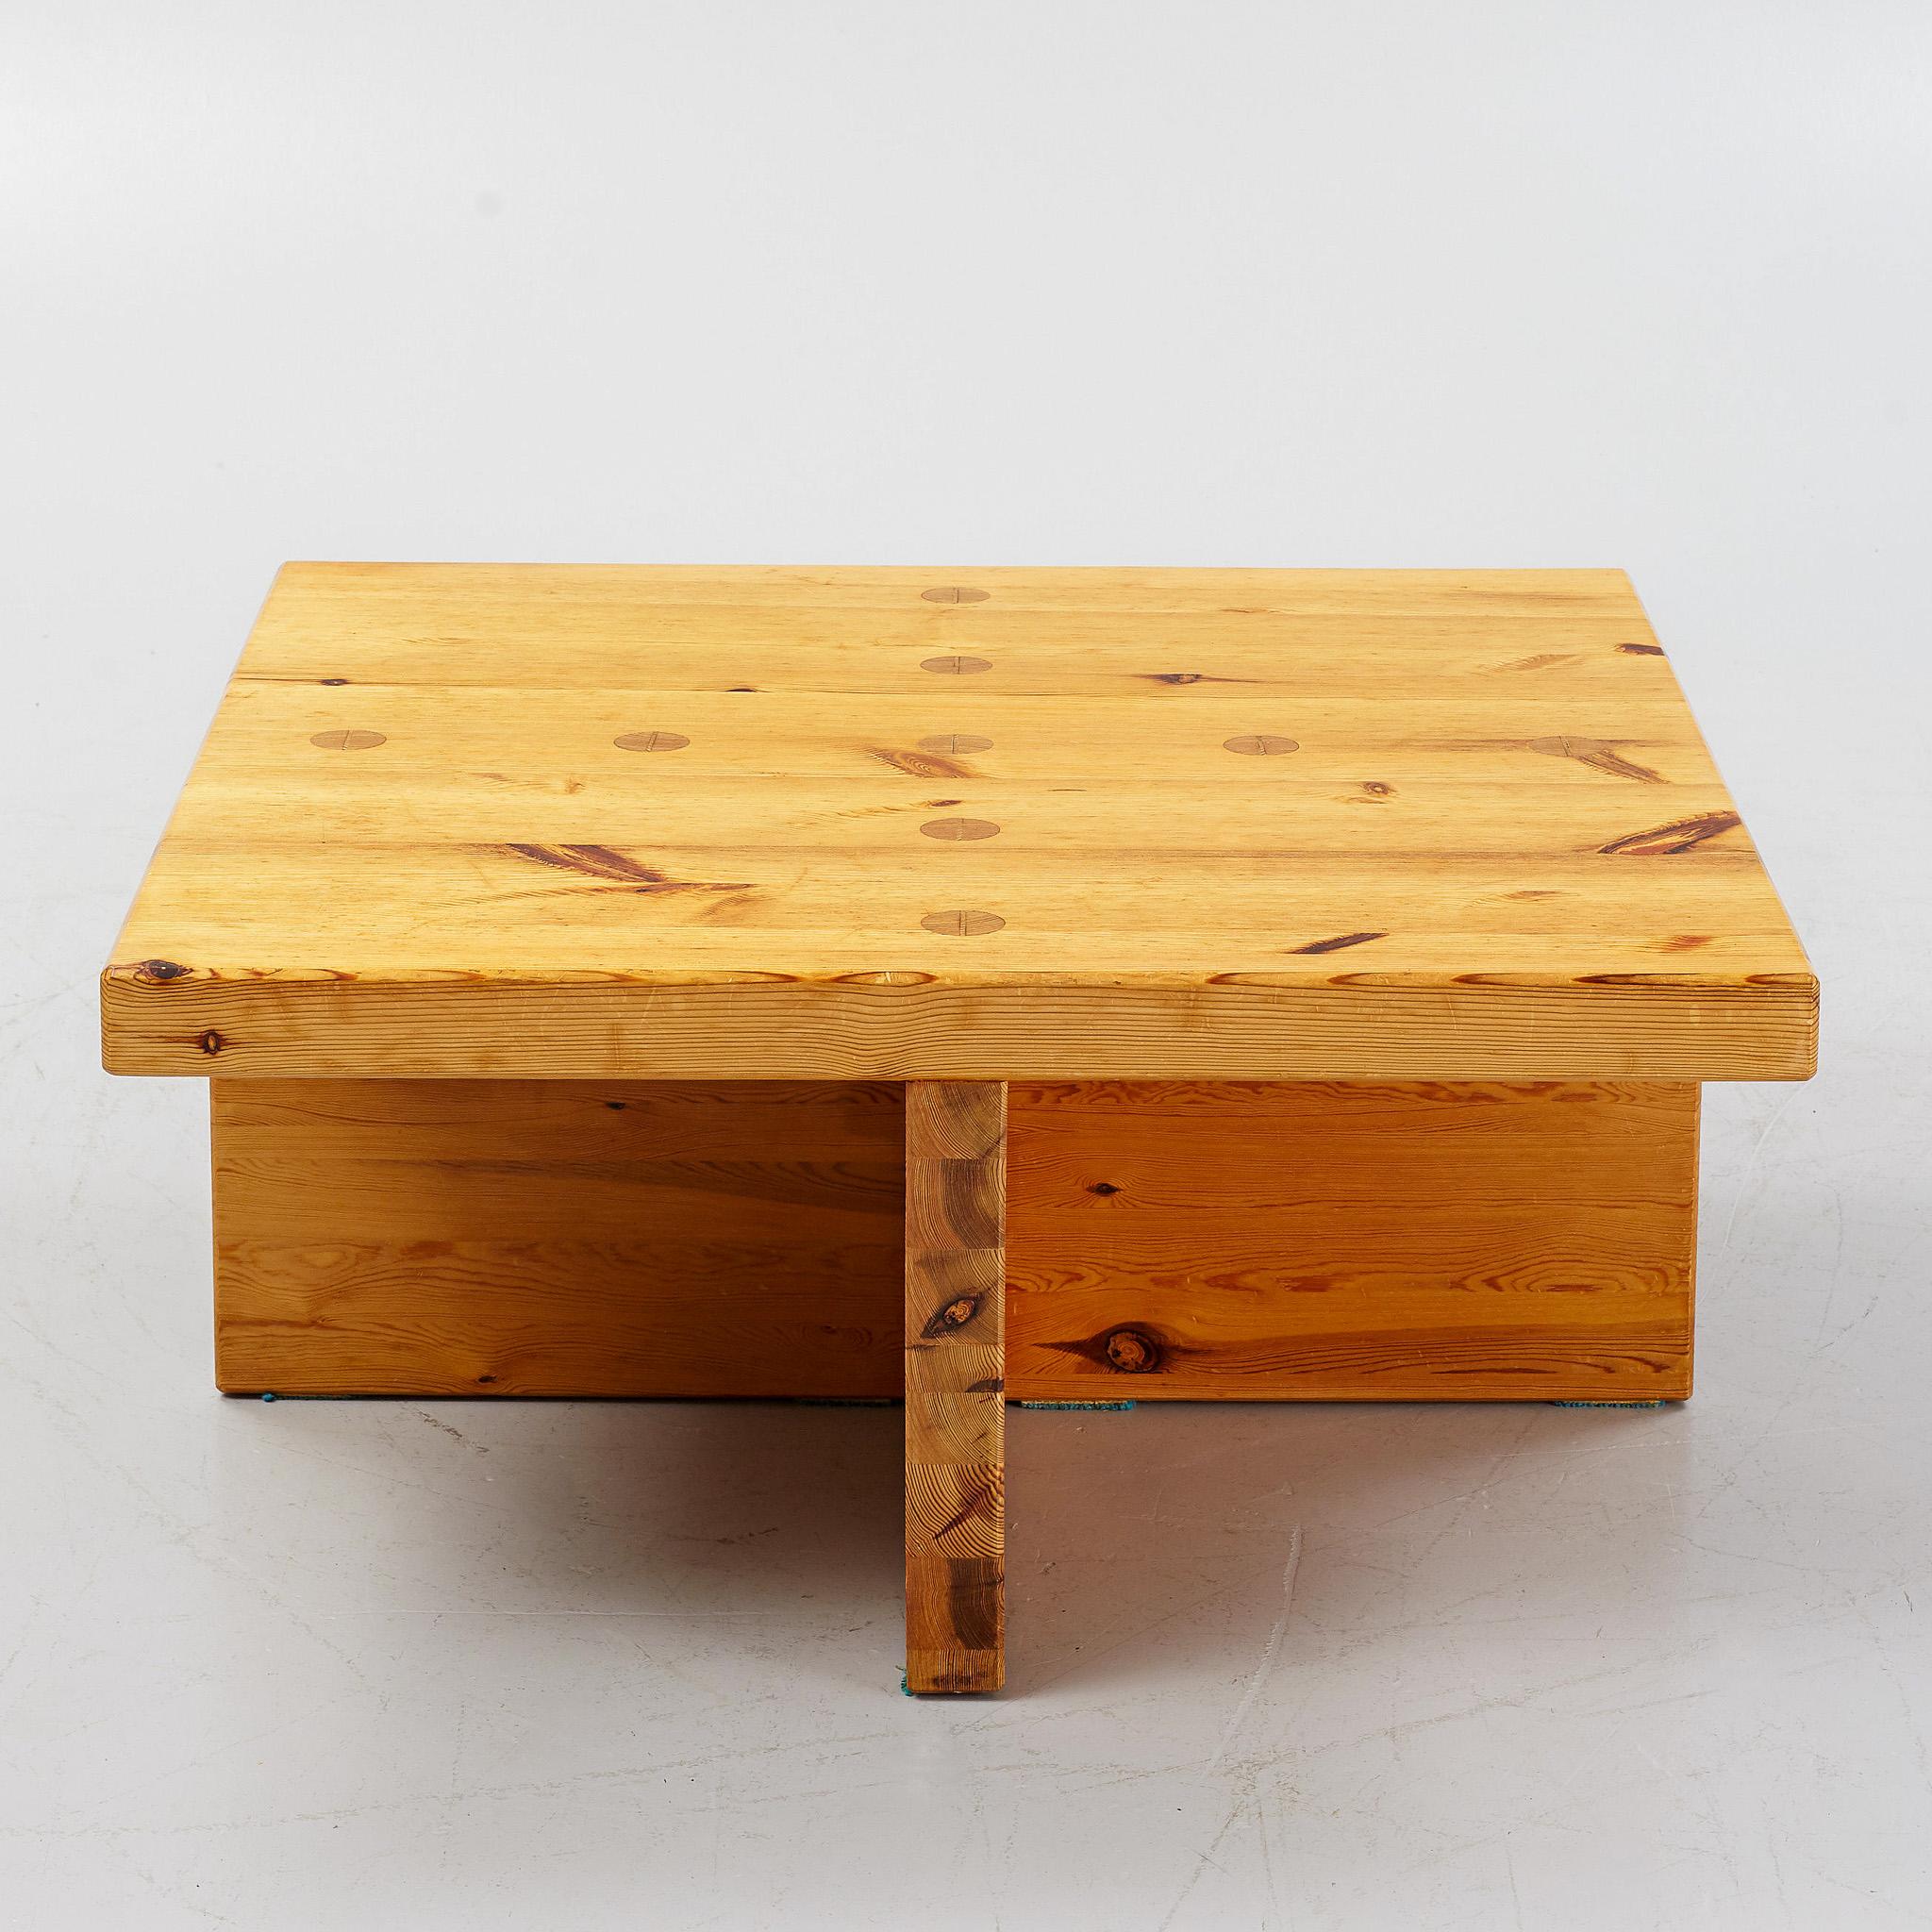 Squared Coffee Sofa Table in Solid Pine by Sven Larsson Produced in Sweden 1970s For Sale 2